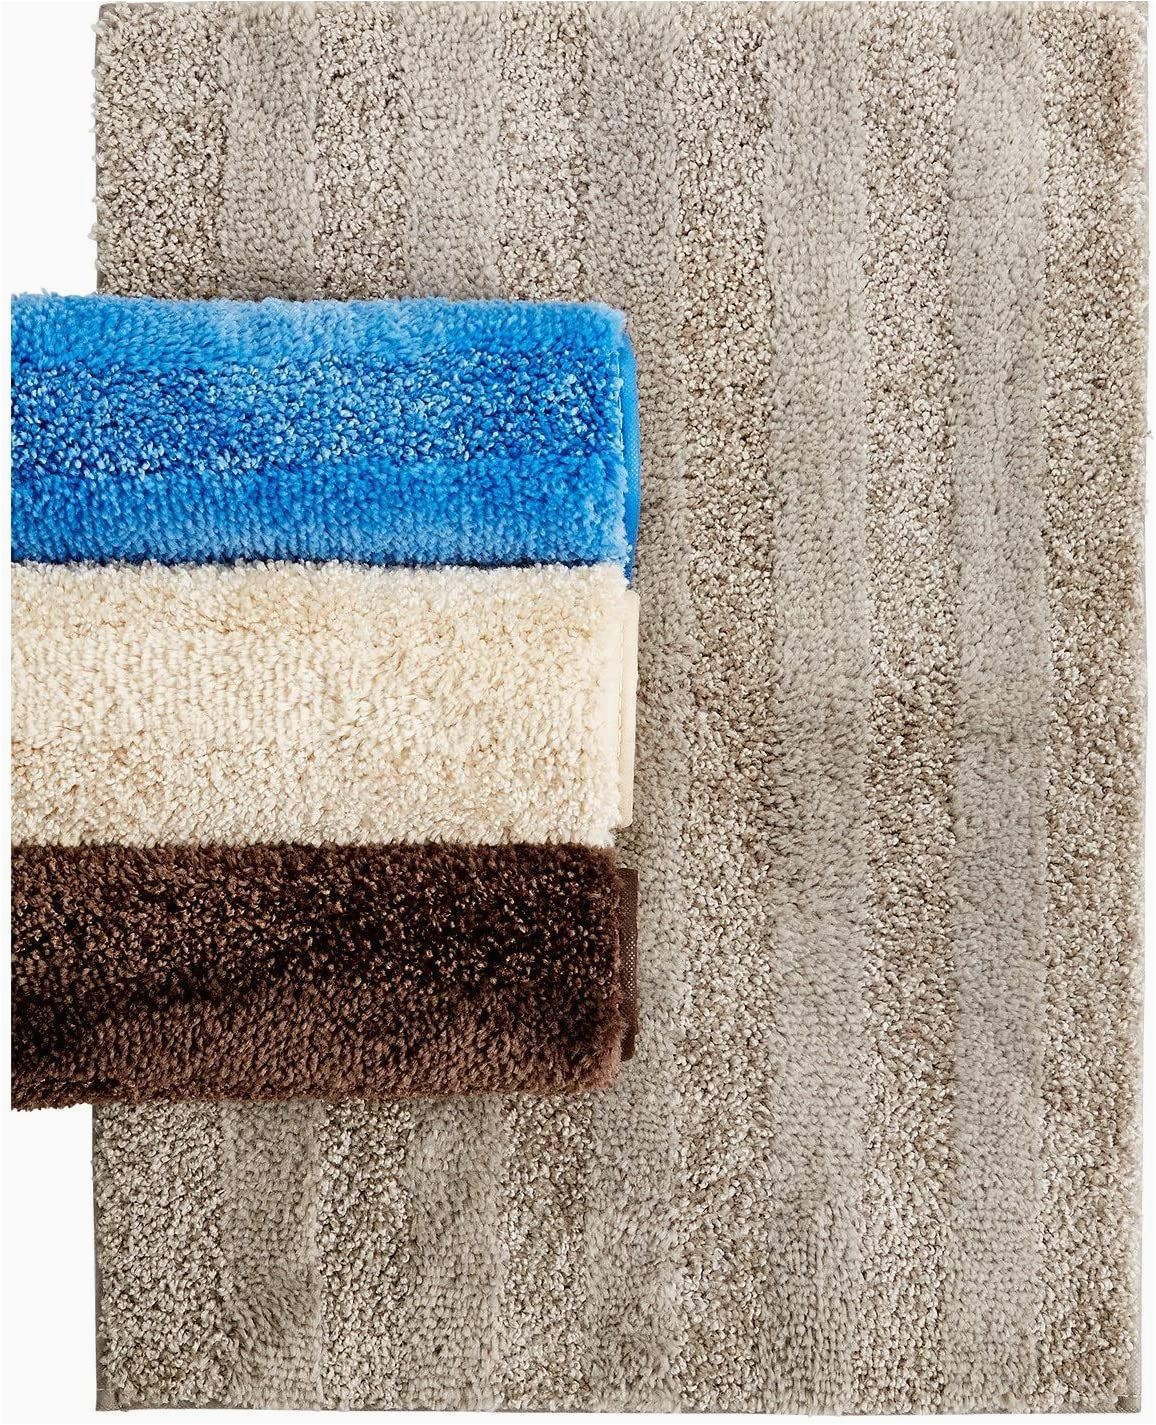 Mohawk Home Bathroom Rugs Mohawk Home Luster Stripe Bath Rug with Latex for Secure Grip Size 24 X 17 Inches Nylon Green Walmart